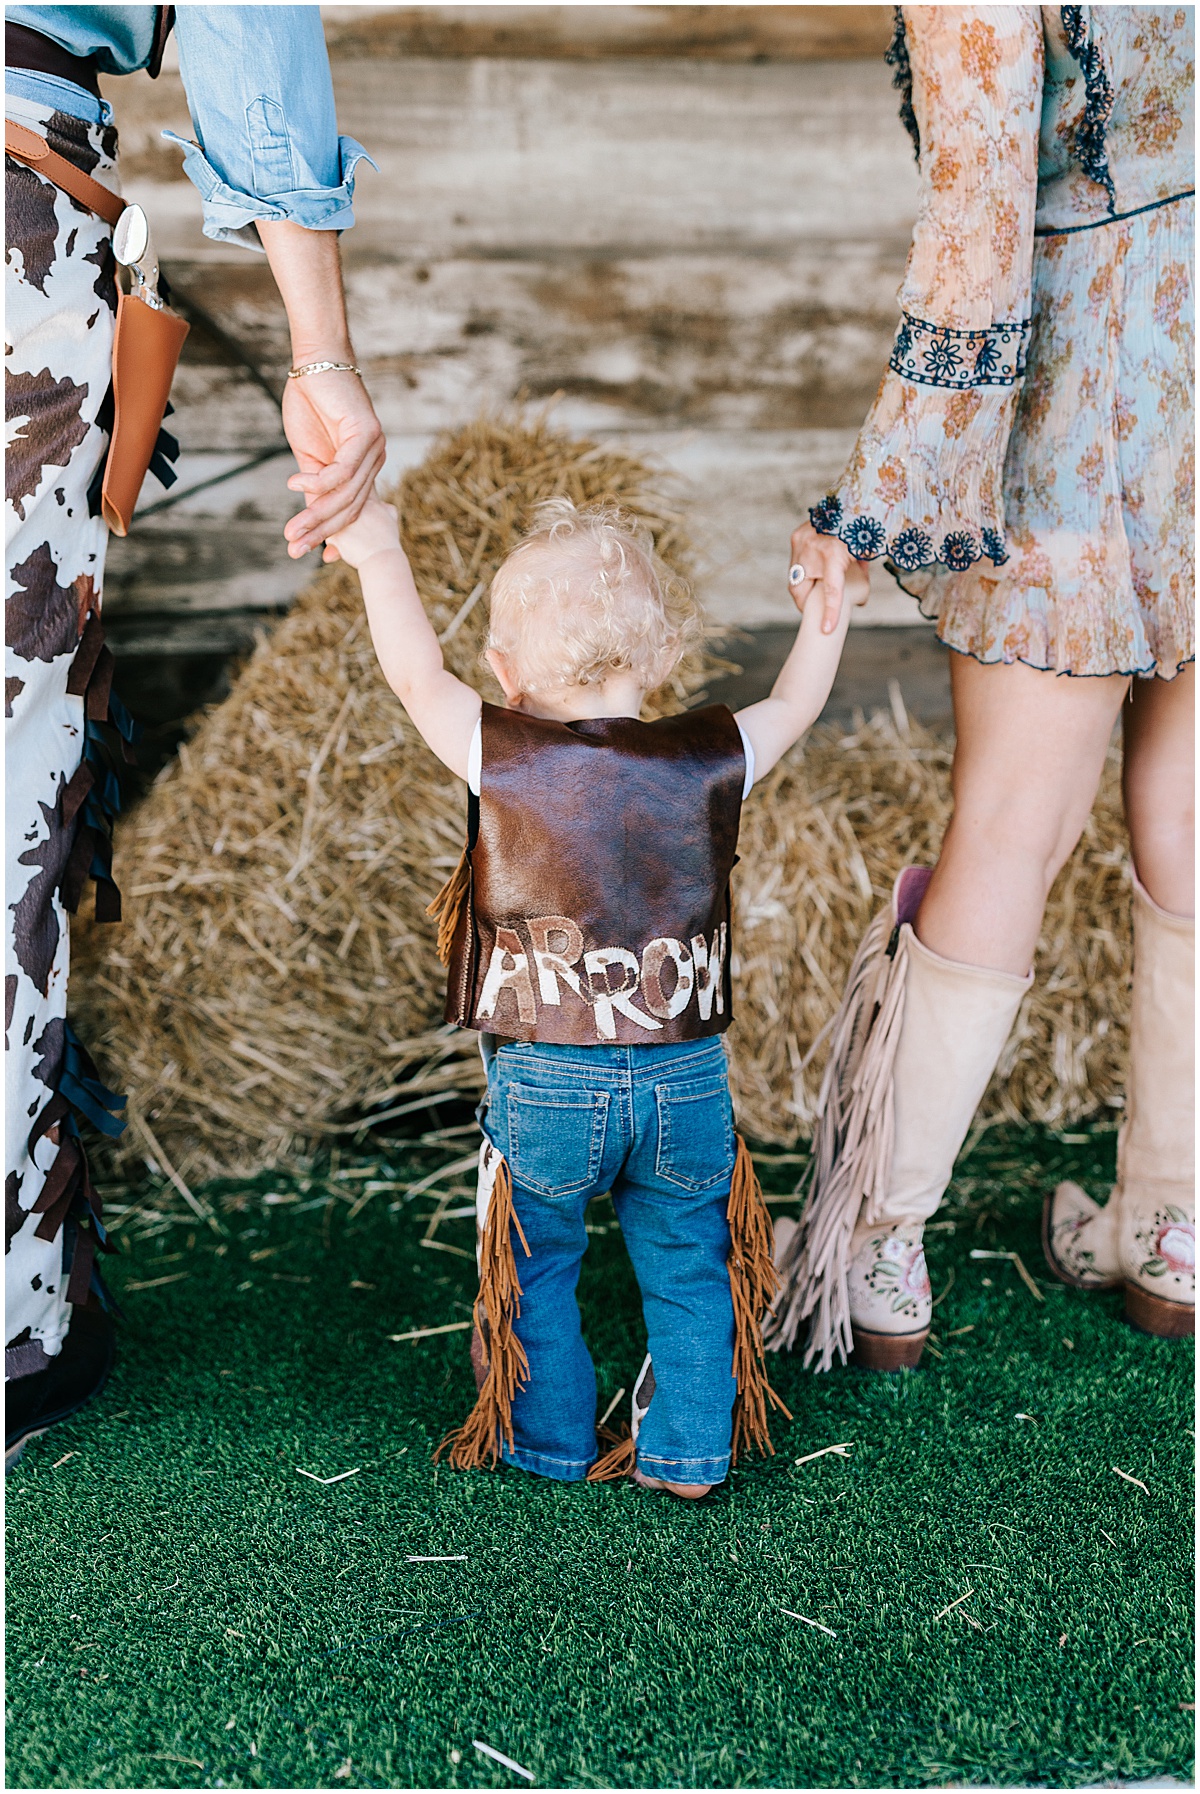 1st Rodeo Birthday Portraits for Arrow's birthday party in ubly Michigan